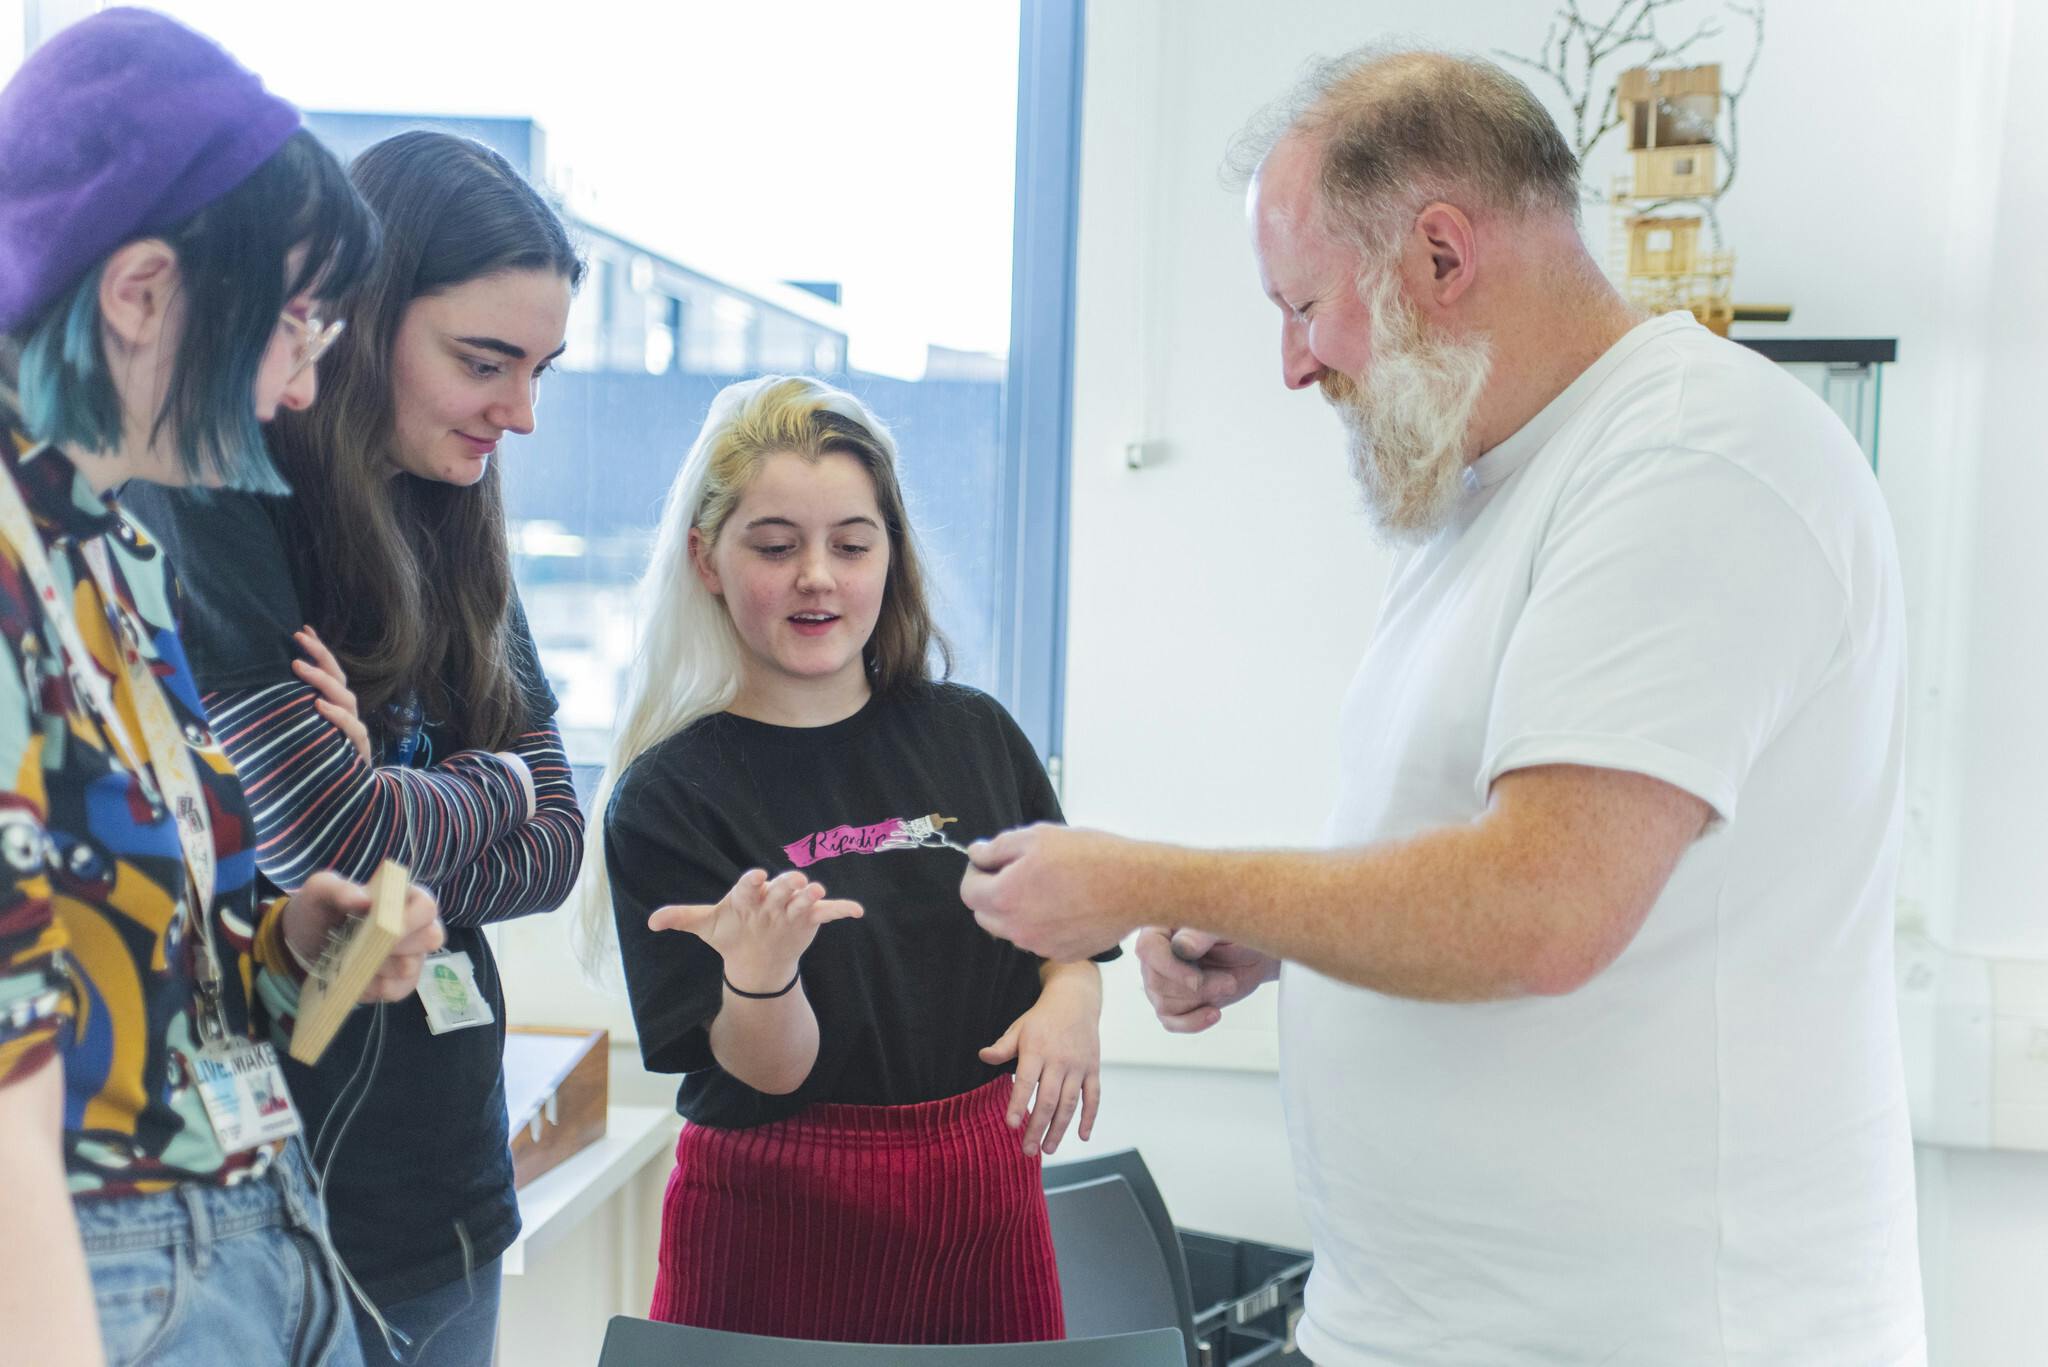 Animator Jim Parkyn, who has worked with Aardman Animations, shows three students how to create a clay character.